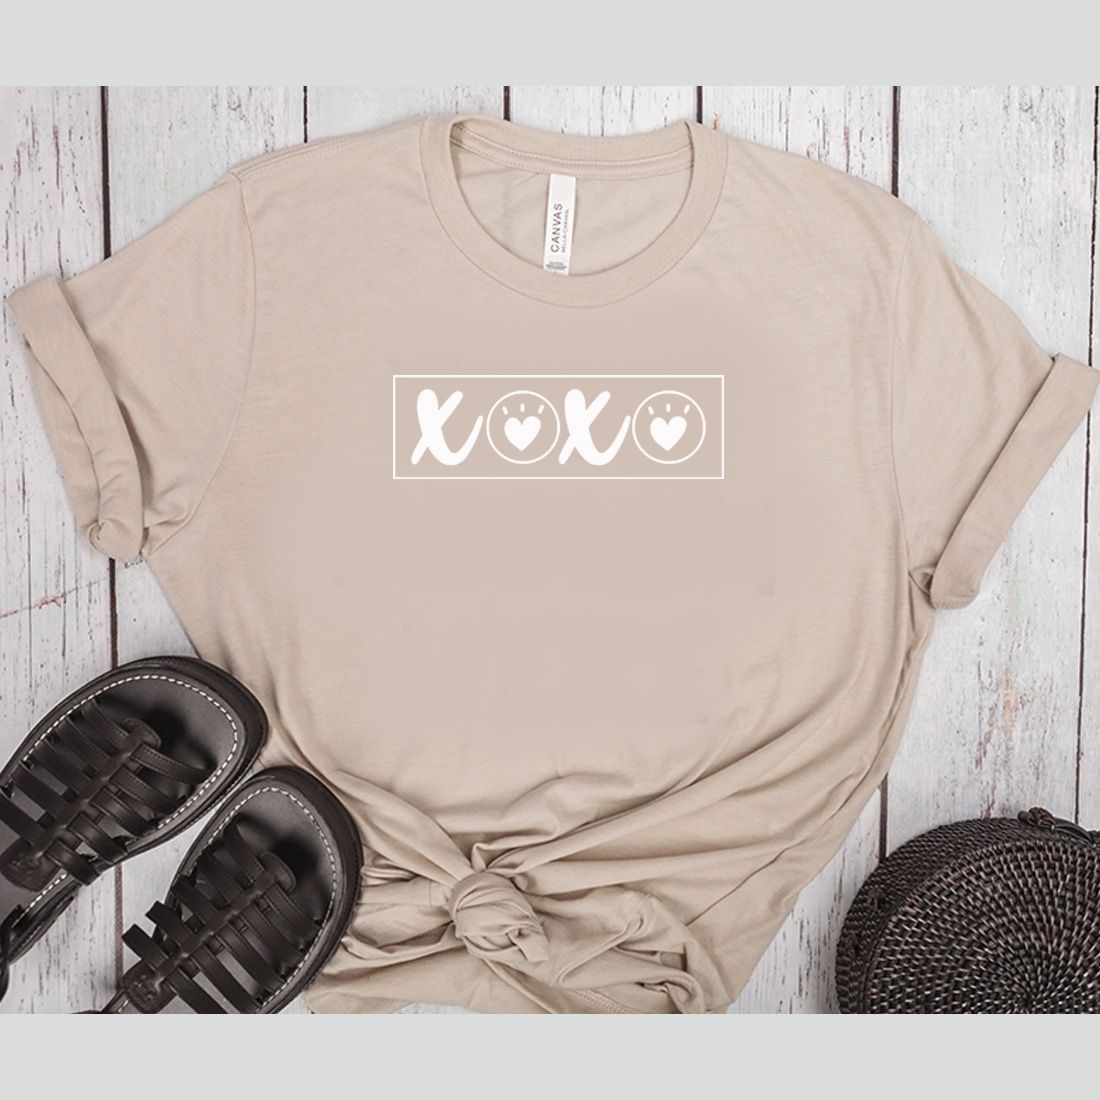 Image of a t-shirt with a wonderful inscription Xoxo